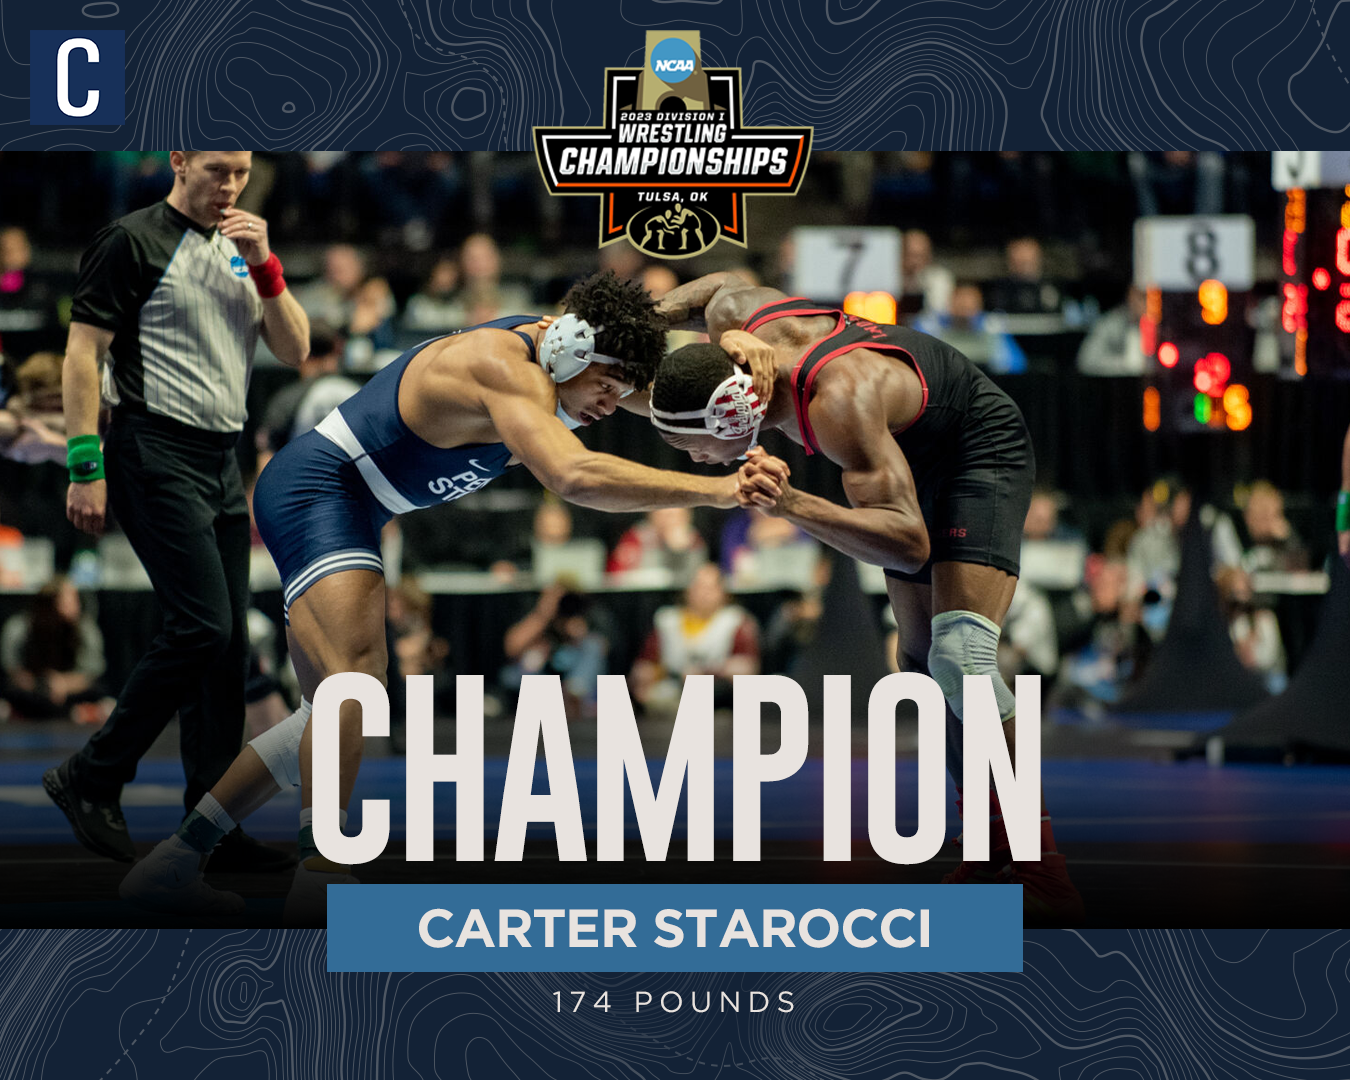 Penn State wrestling's Carter Starocci wins 3rd consecutive national title via pin